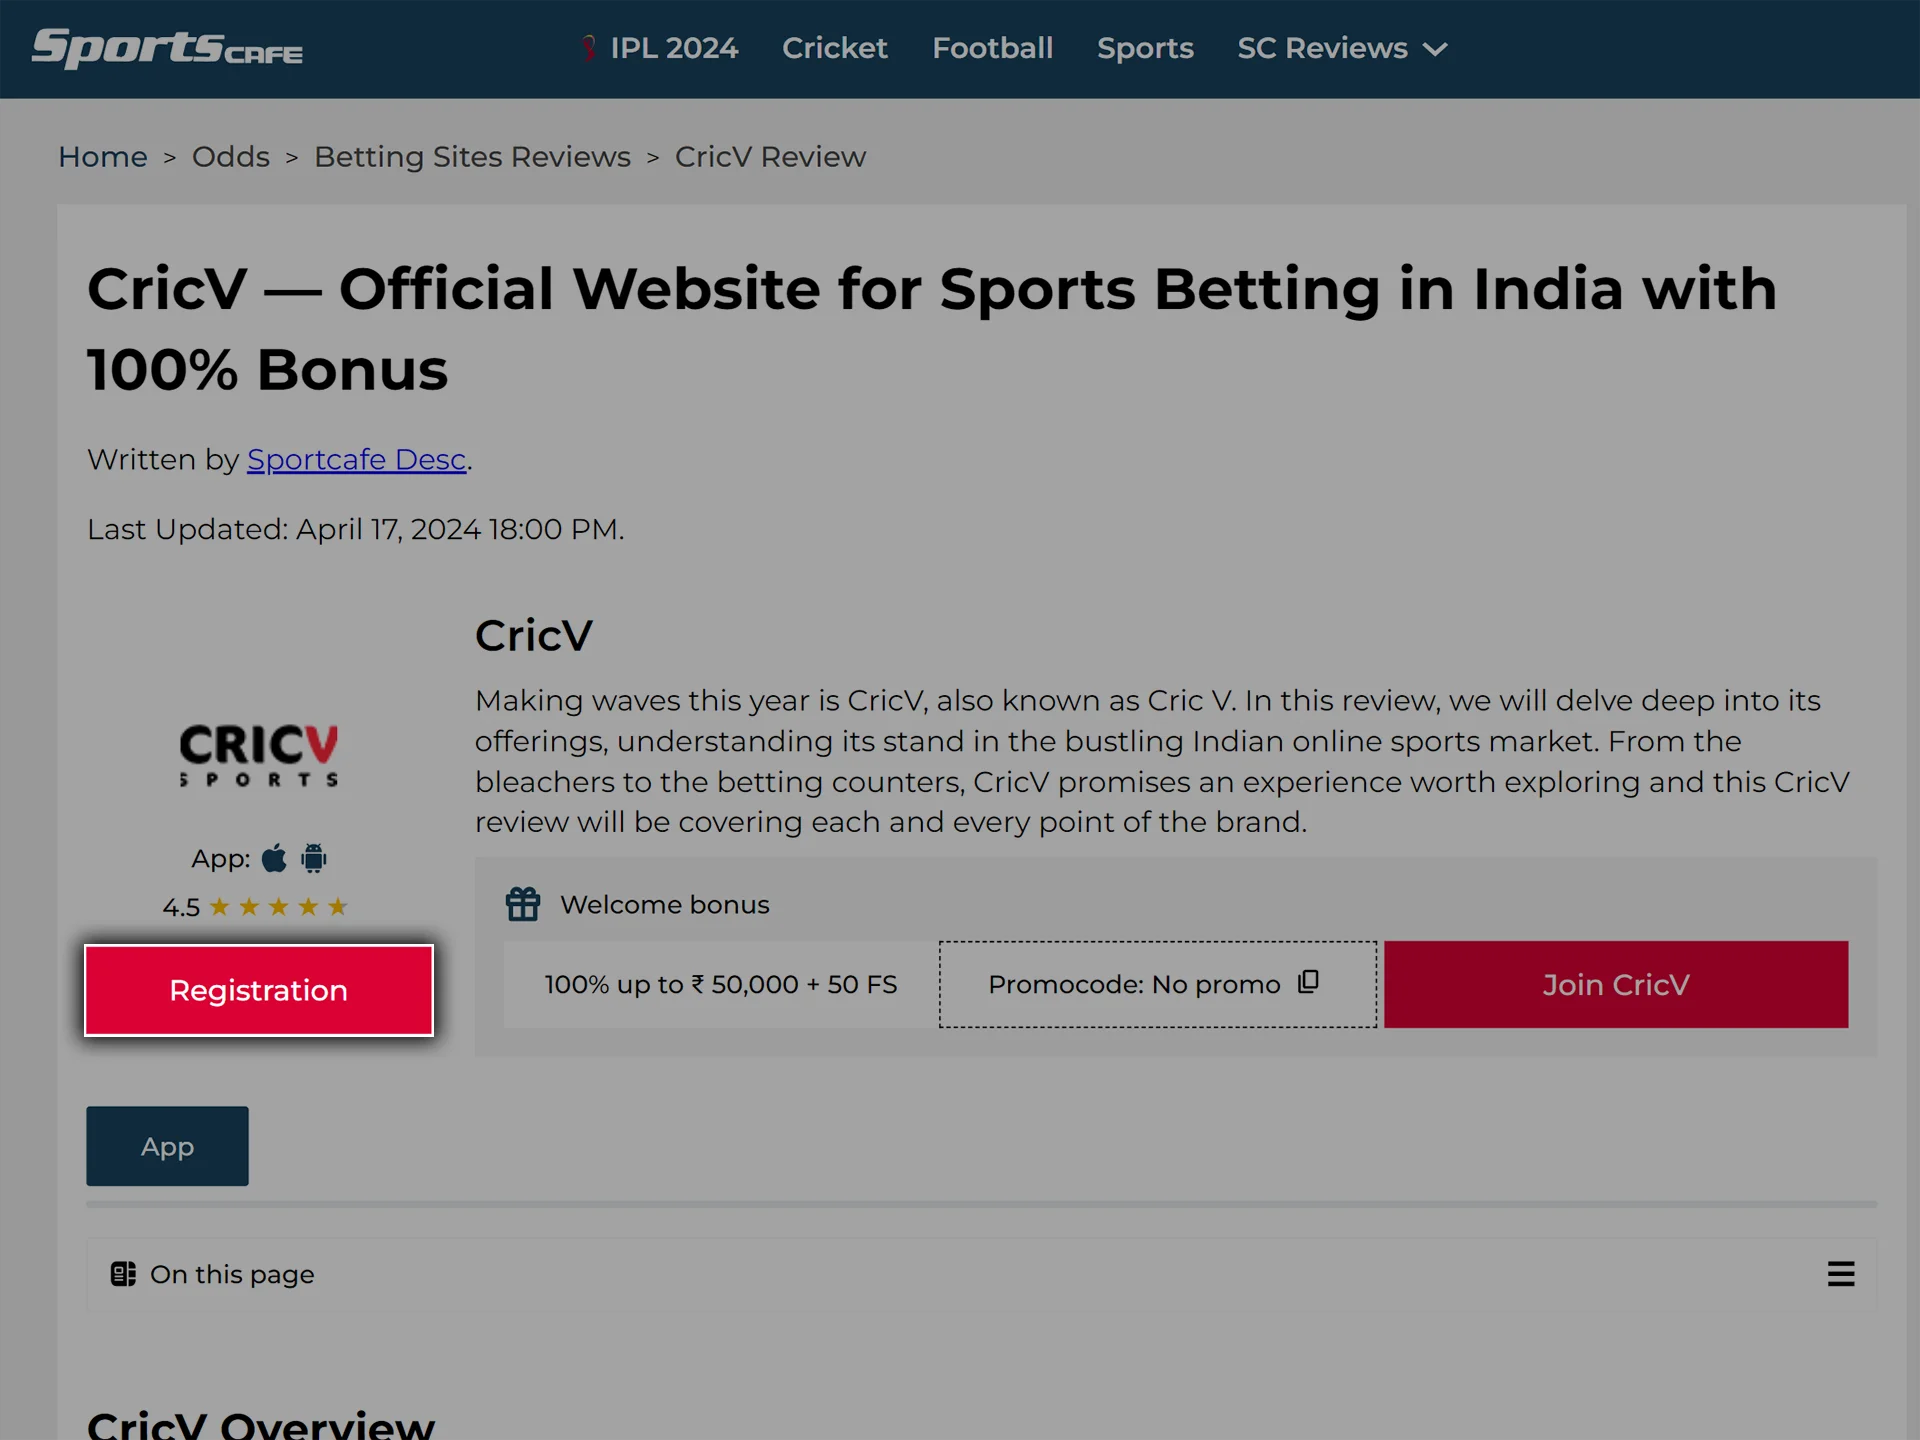 Use the link to open the CricV website.